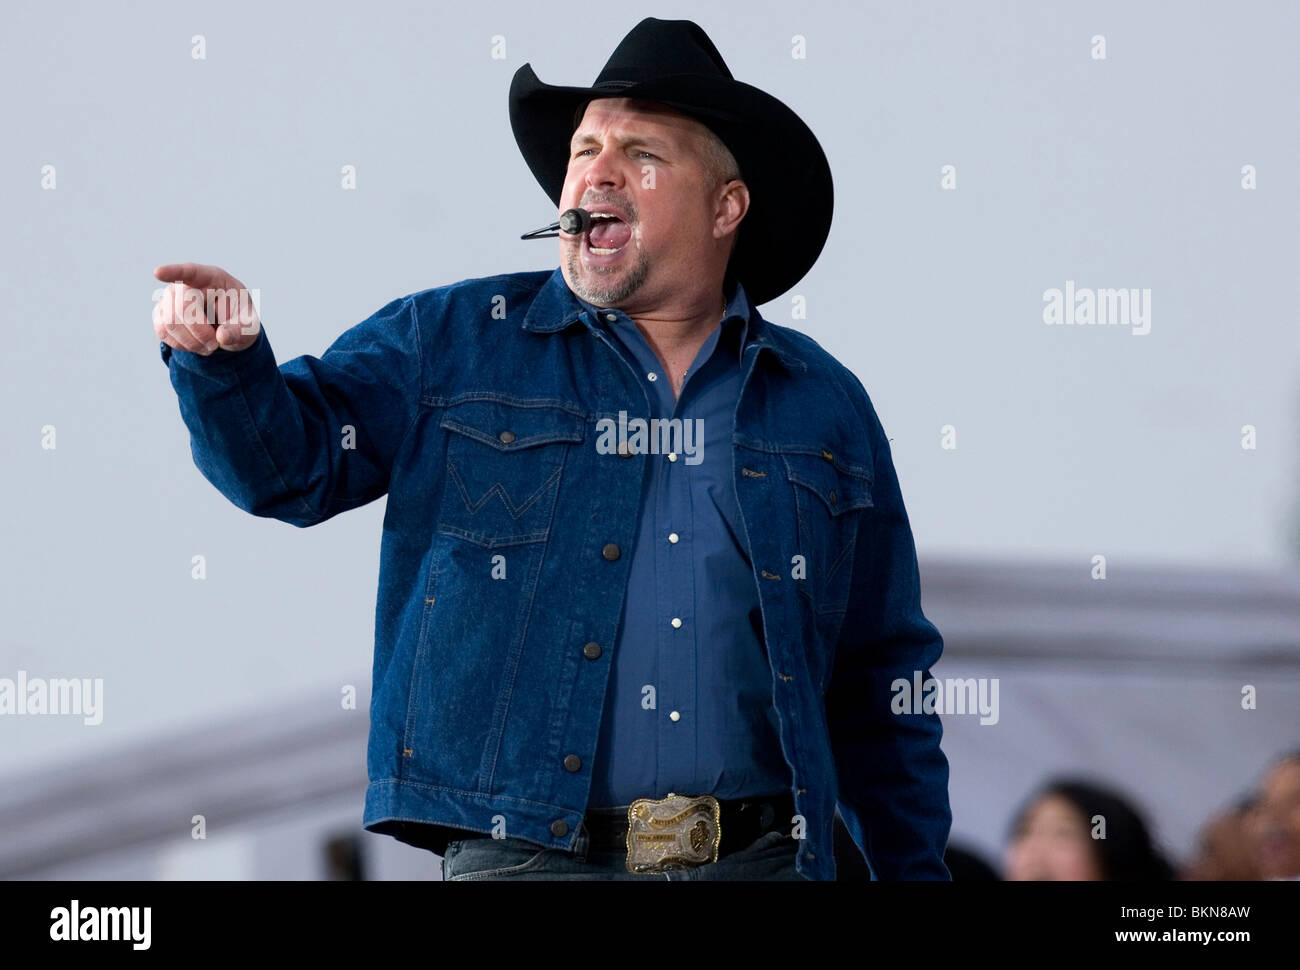 Garth Brooks performs at the We Are One Concert. Stock Photo